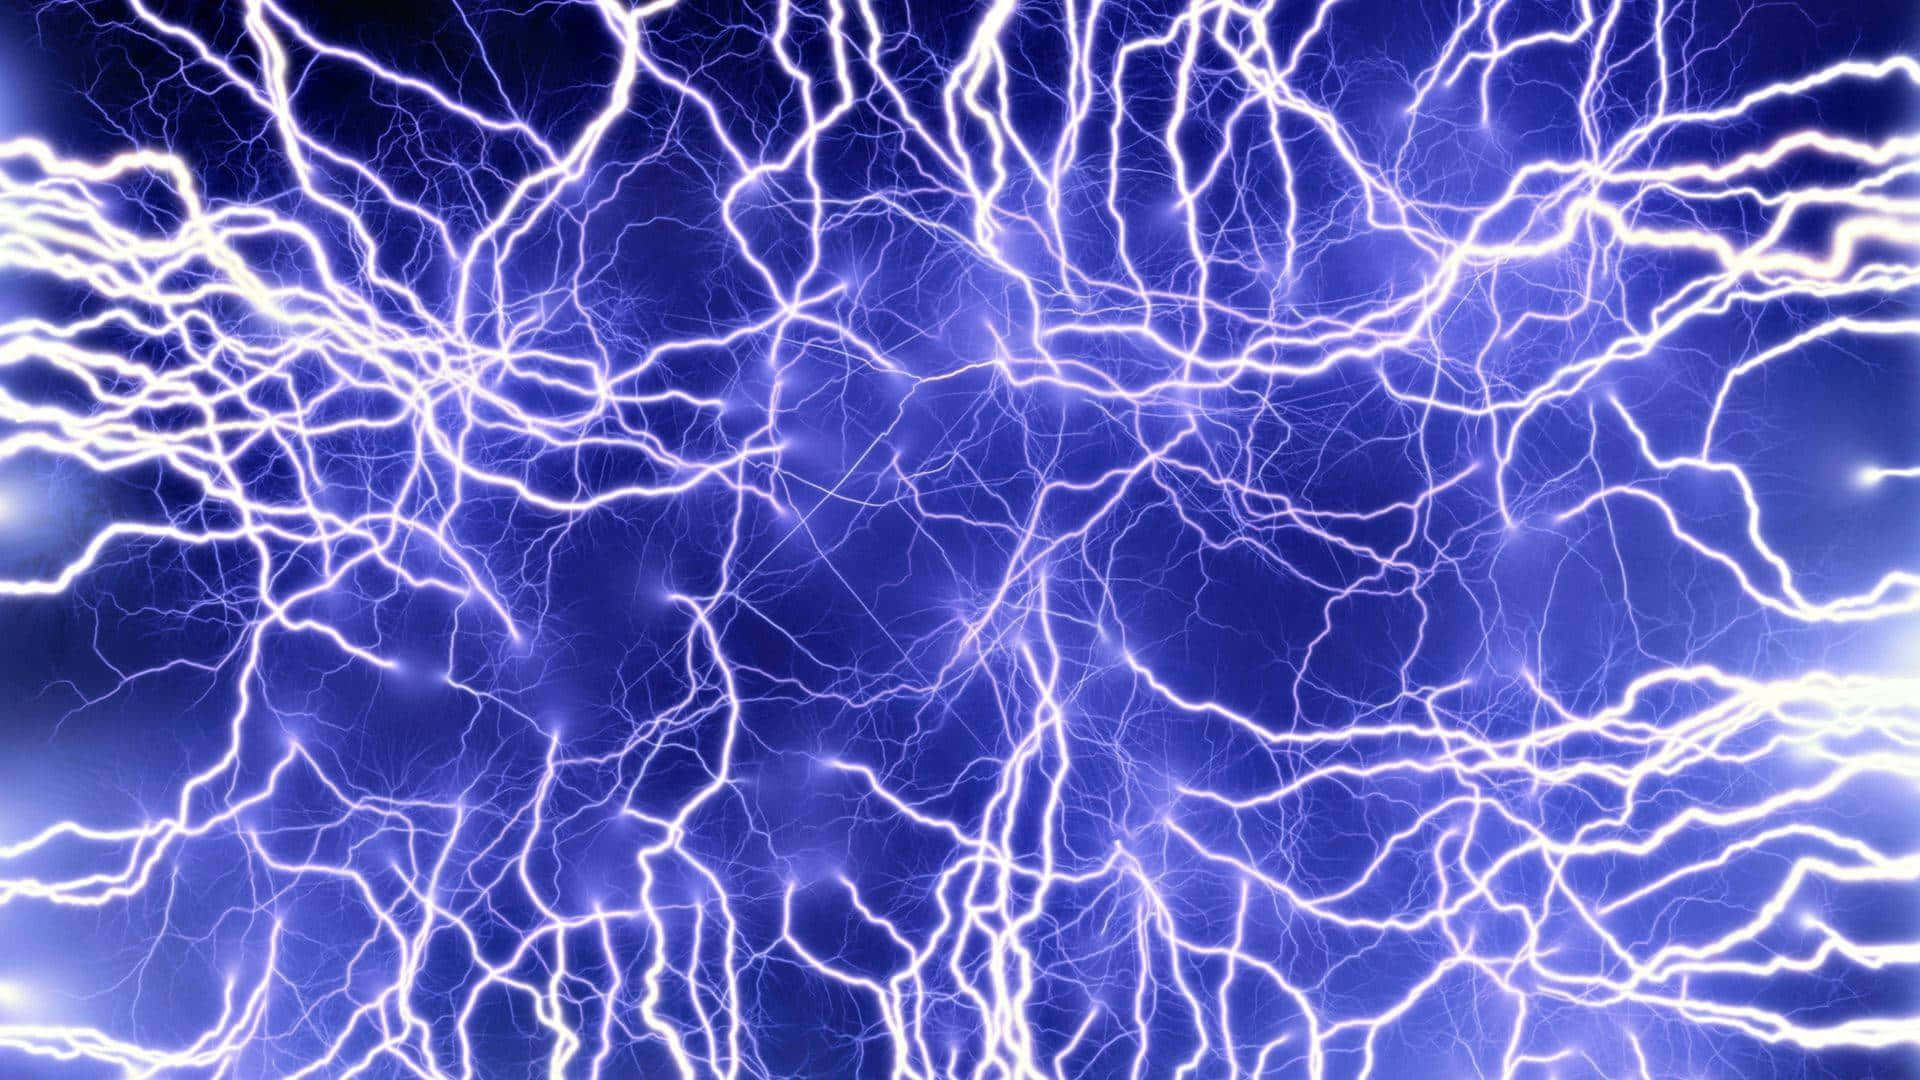 High Voltage Electric Energy Wallpaper